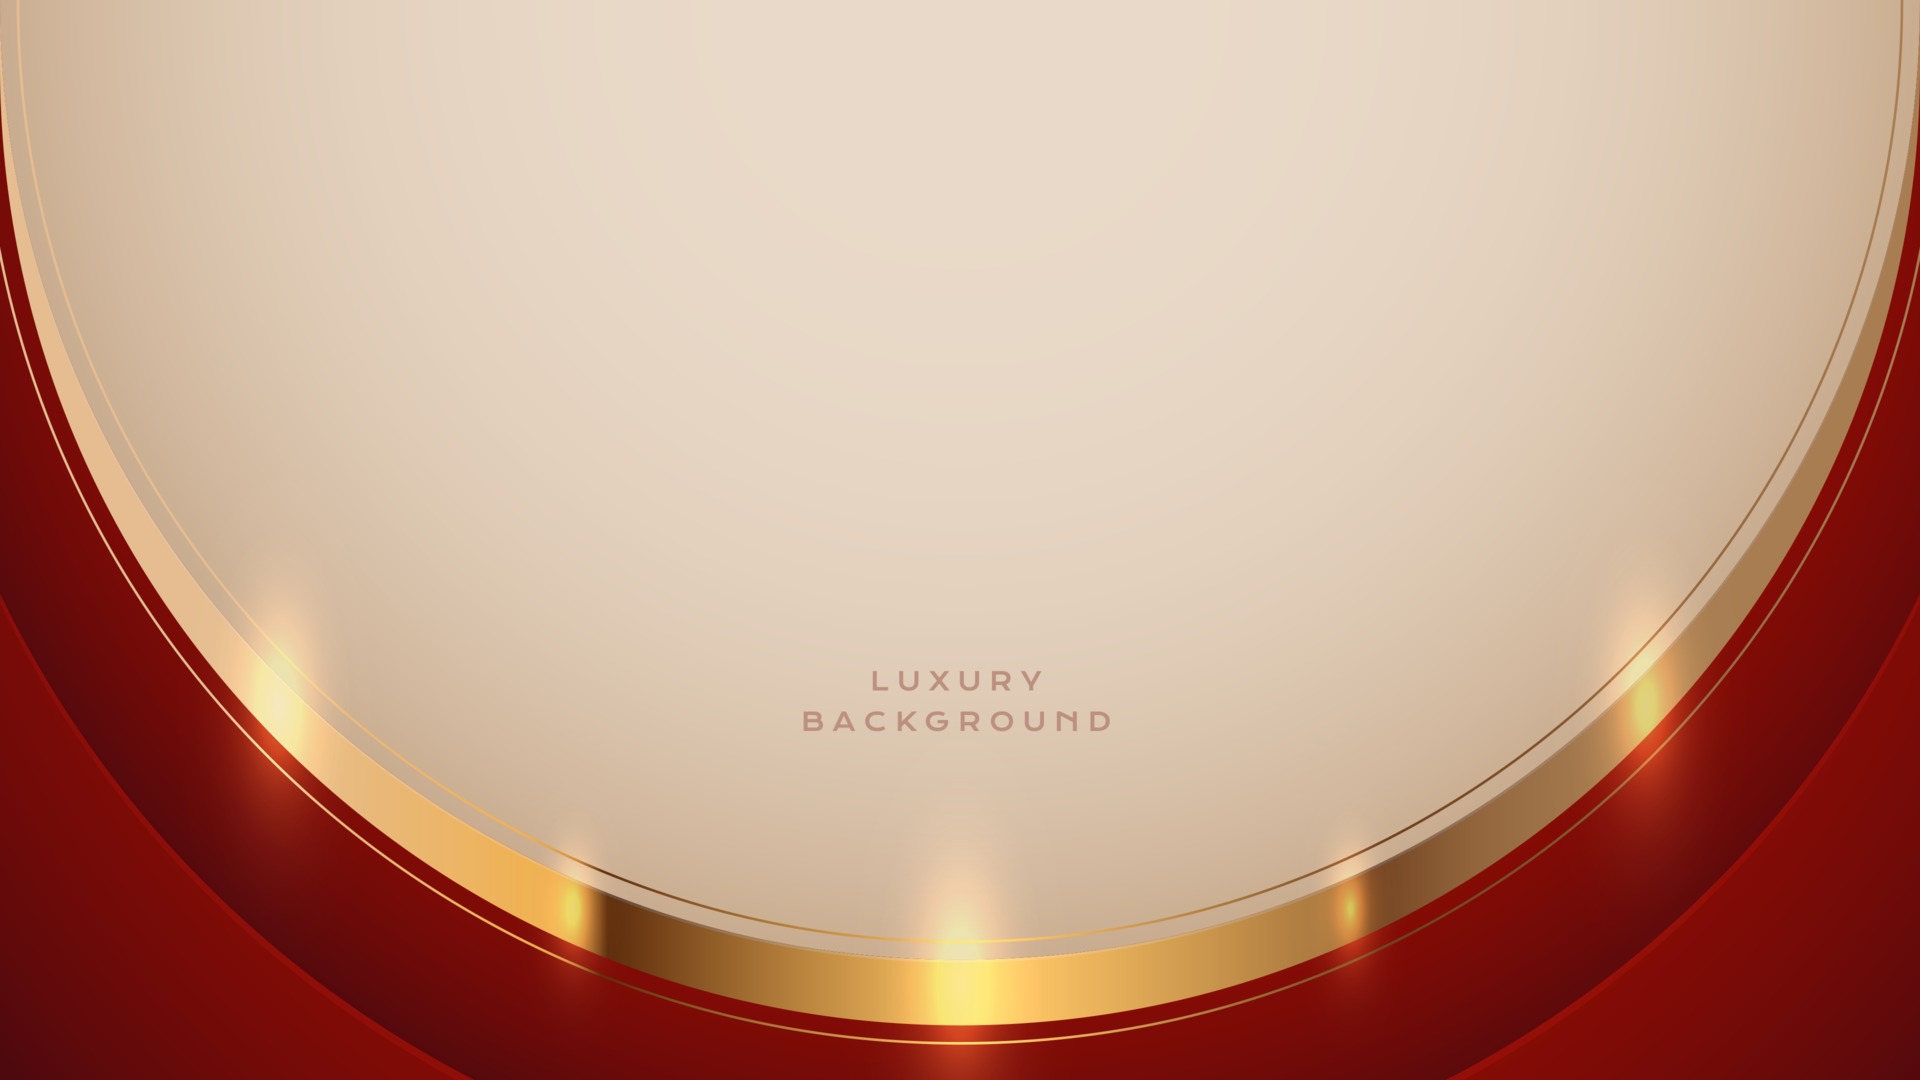 Find the most elegant Abstract red luxury background for your design projects